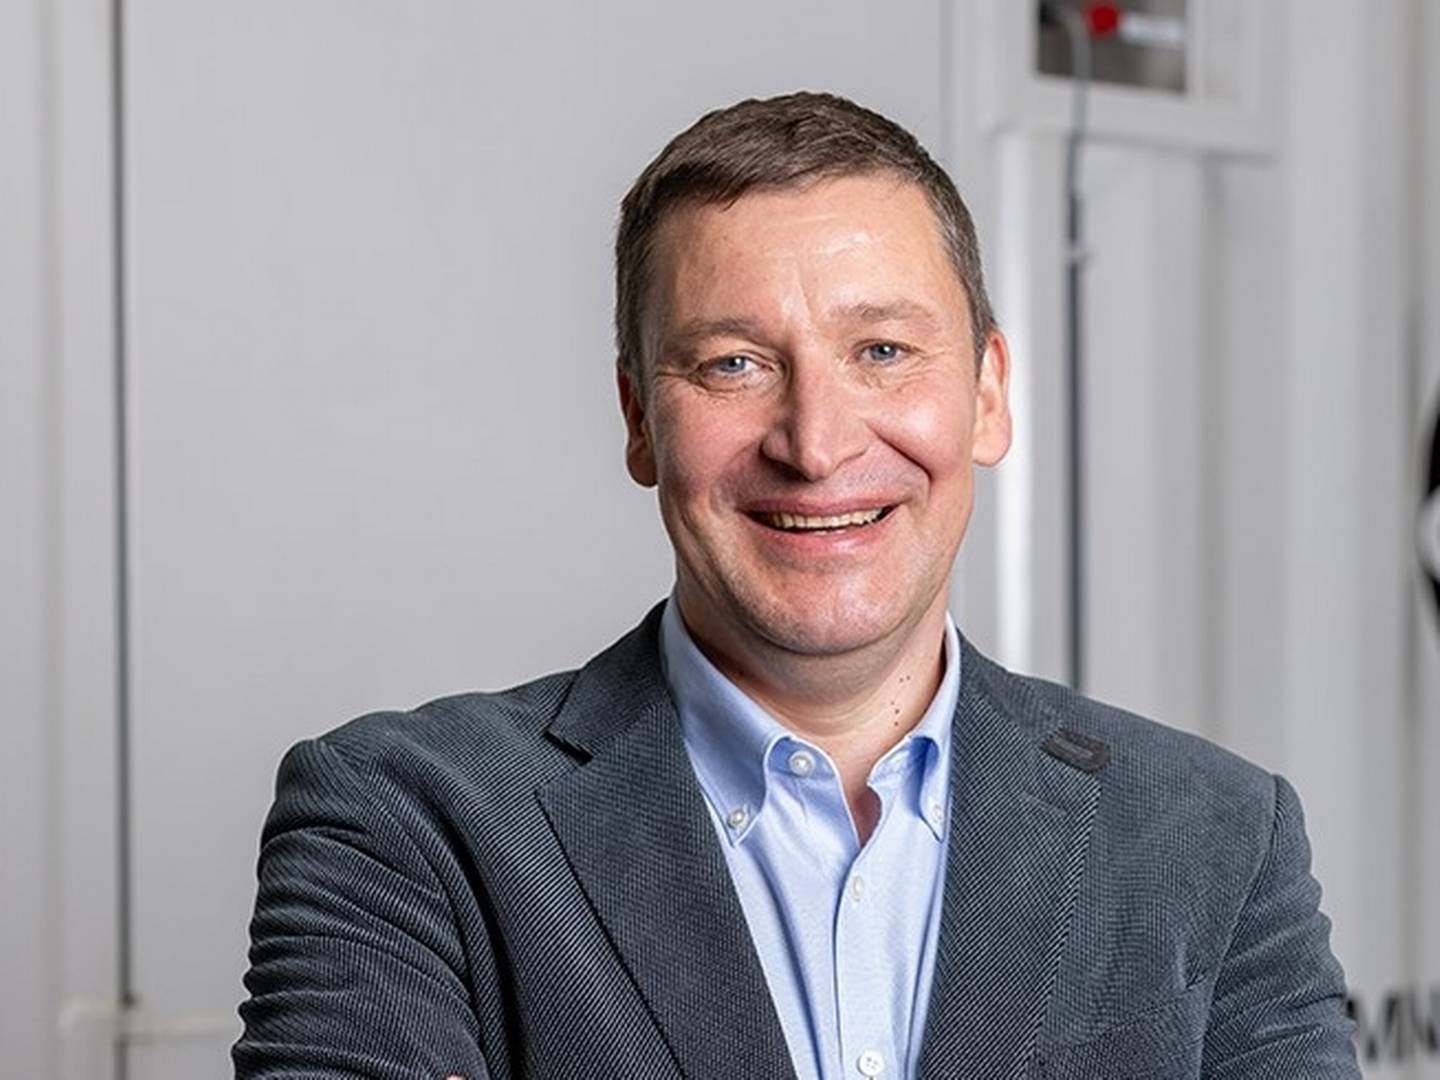 Alexey Ustinov joined Siemens Energy last year as head of the hydrogen business from a similar position at Cummins in the US. | Photo: Cummins